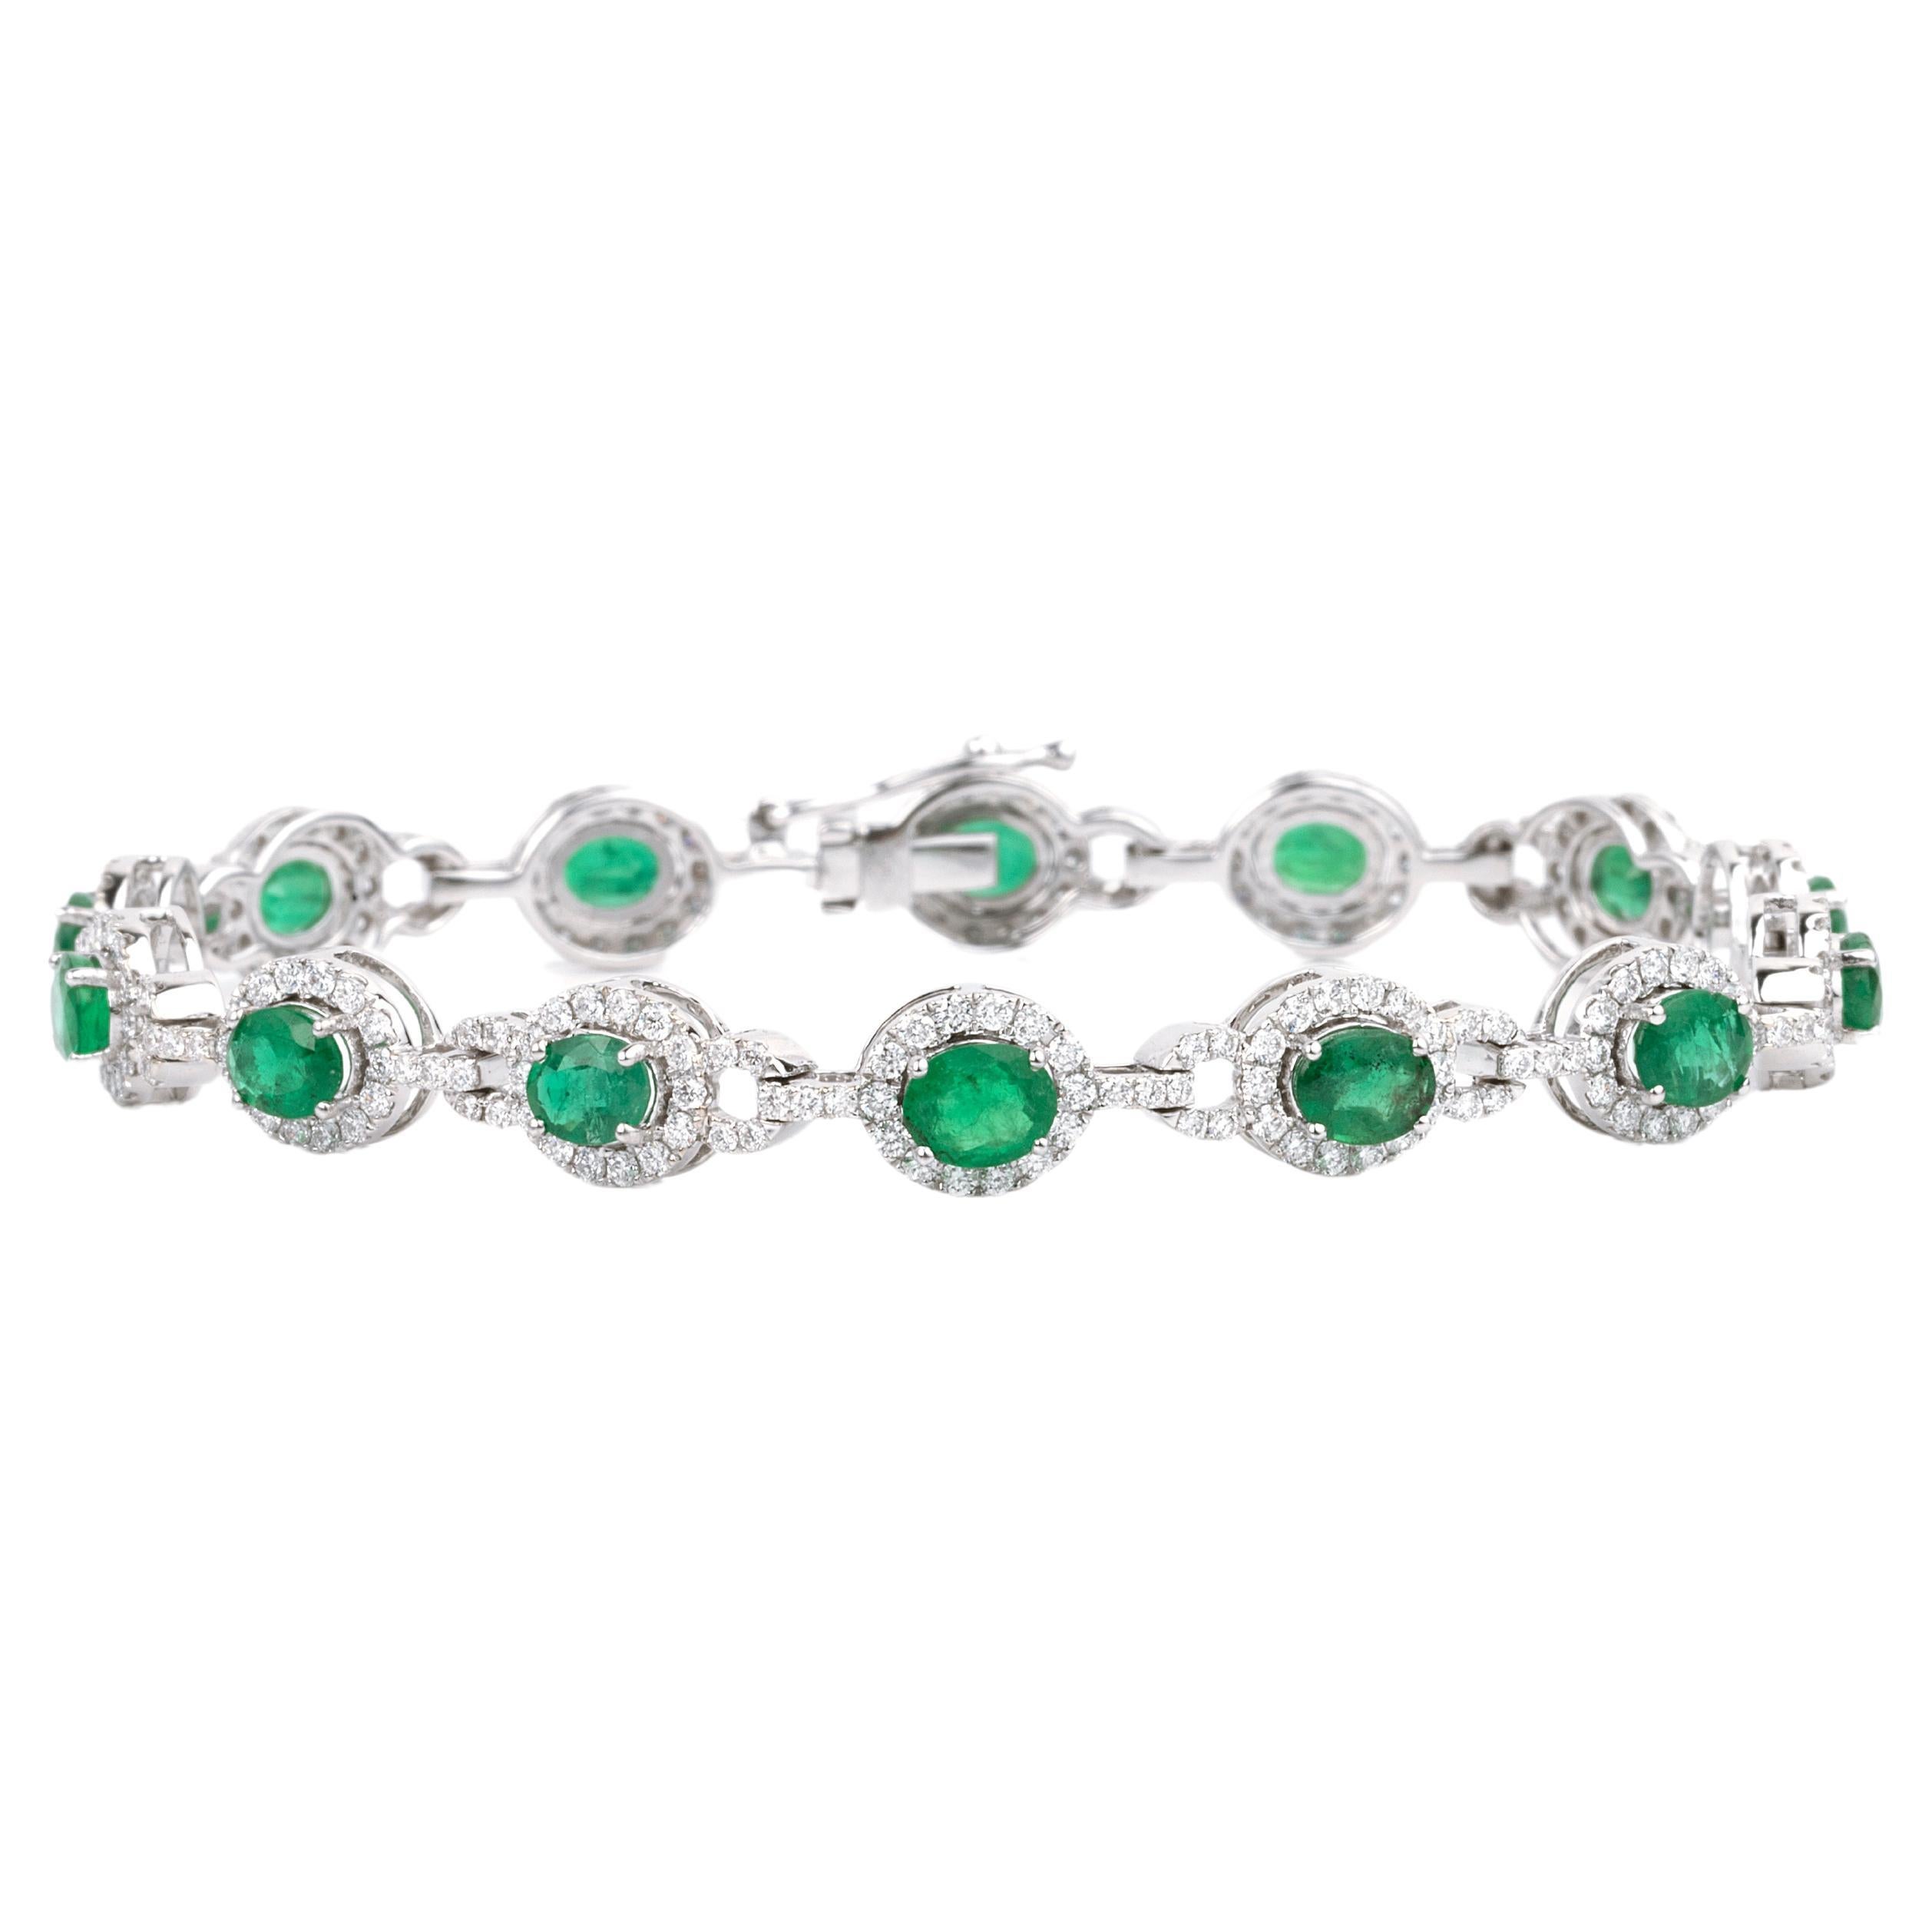 Exceptional 5 Ctw Oval Cut Natural Emerald Bracelet with diamond 18k White Gold For Sale